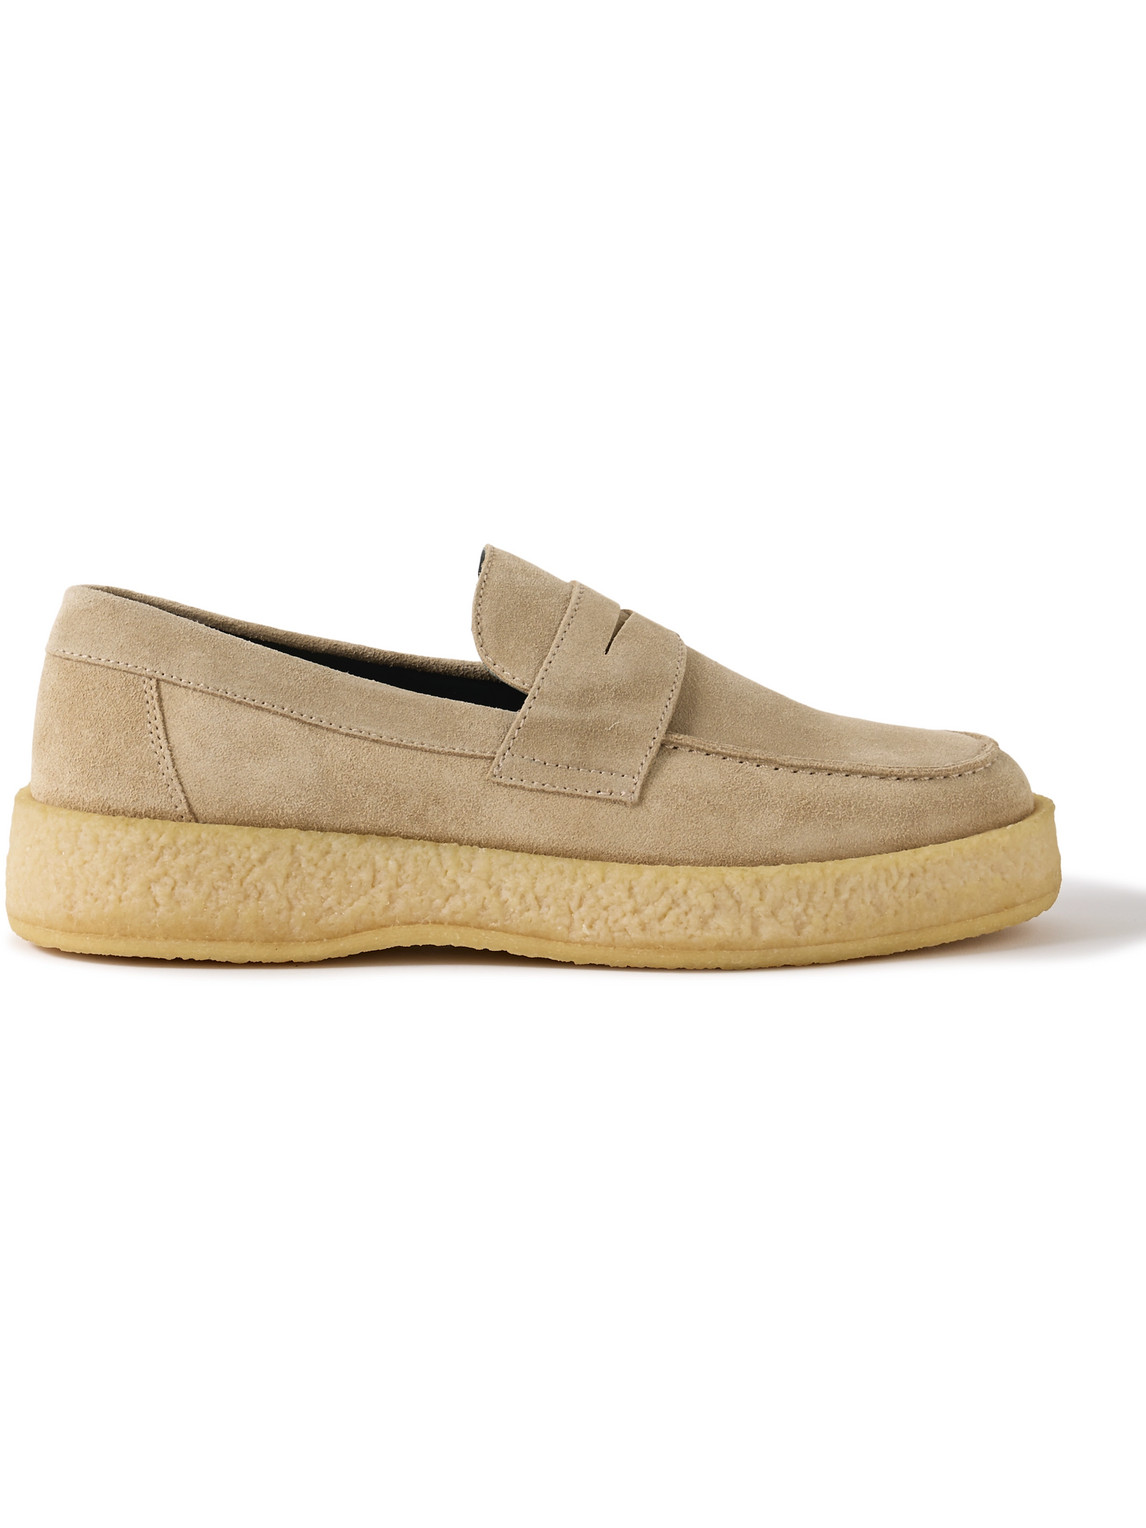 Creeper Suede Penny Loafer